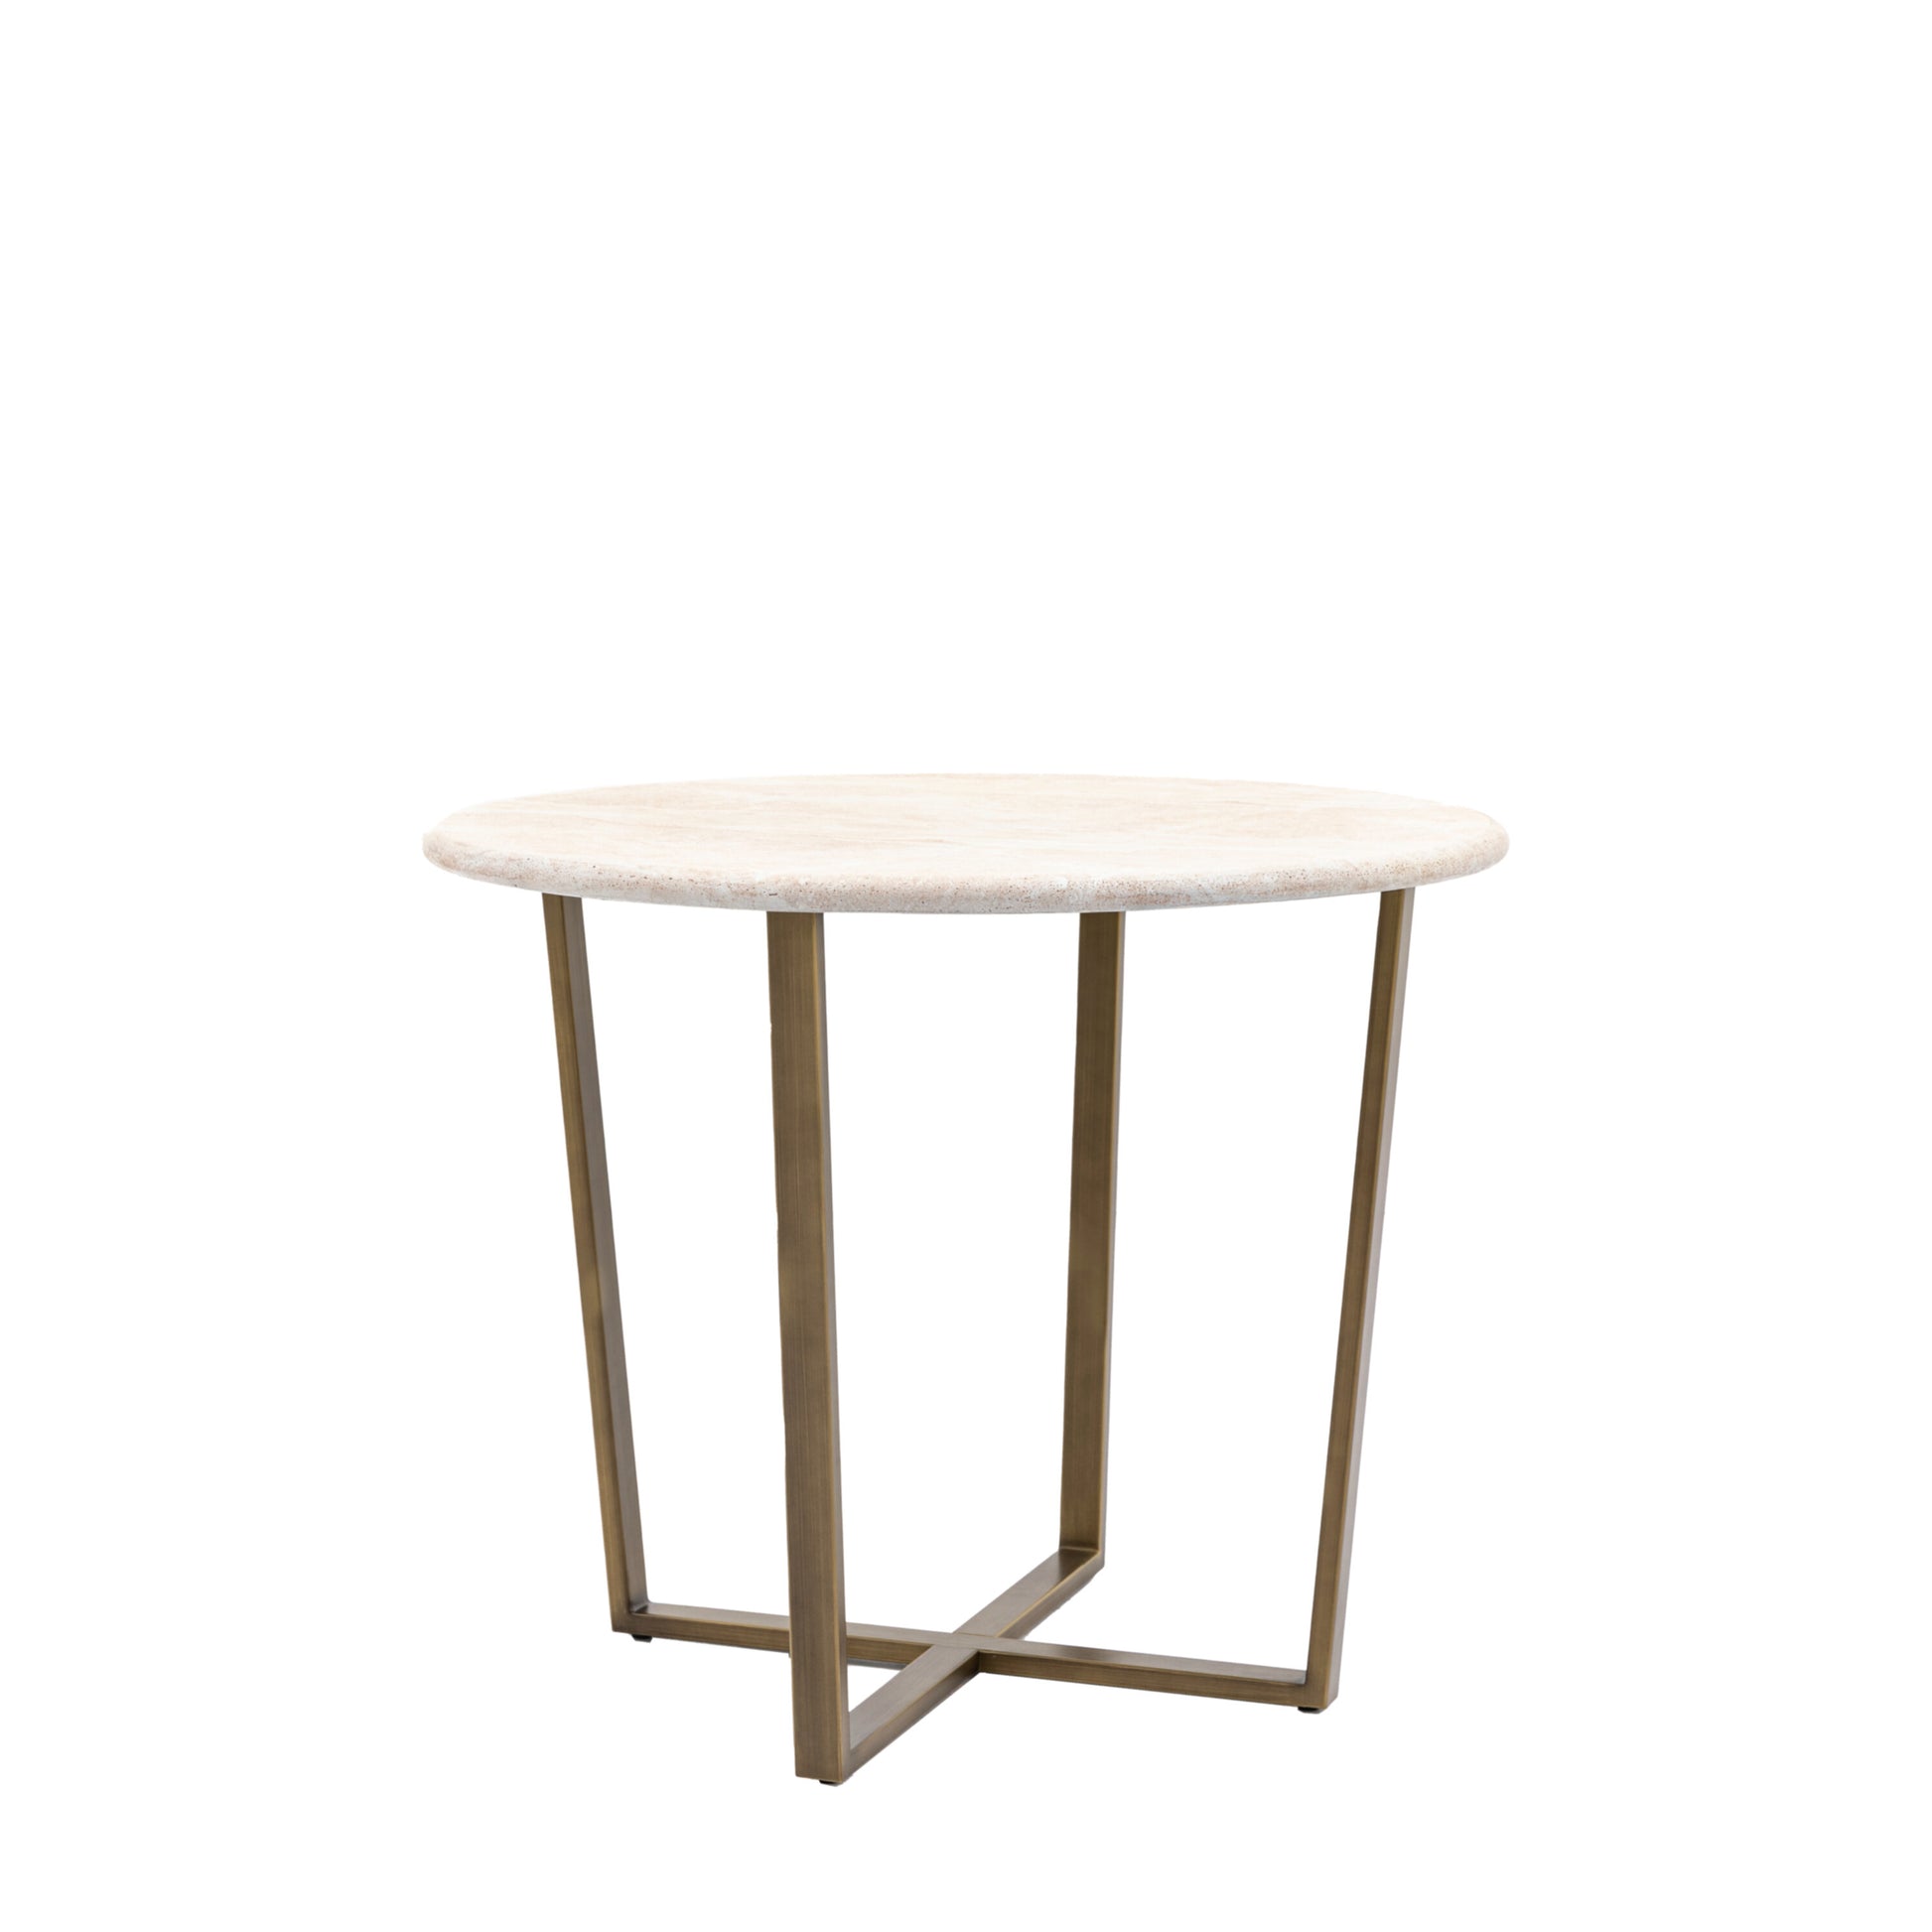 White Faux Marble And Steel Frame Round Dining Table